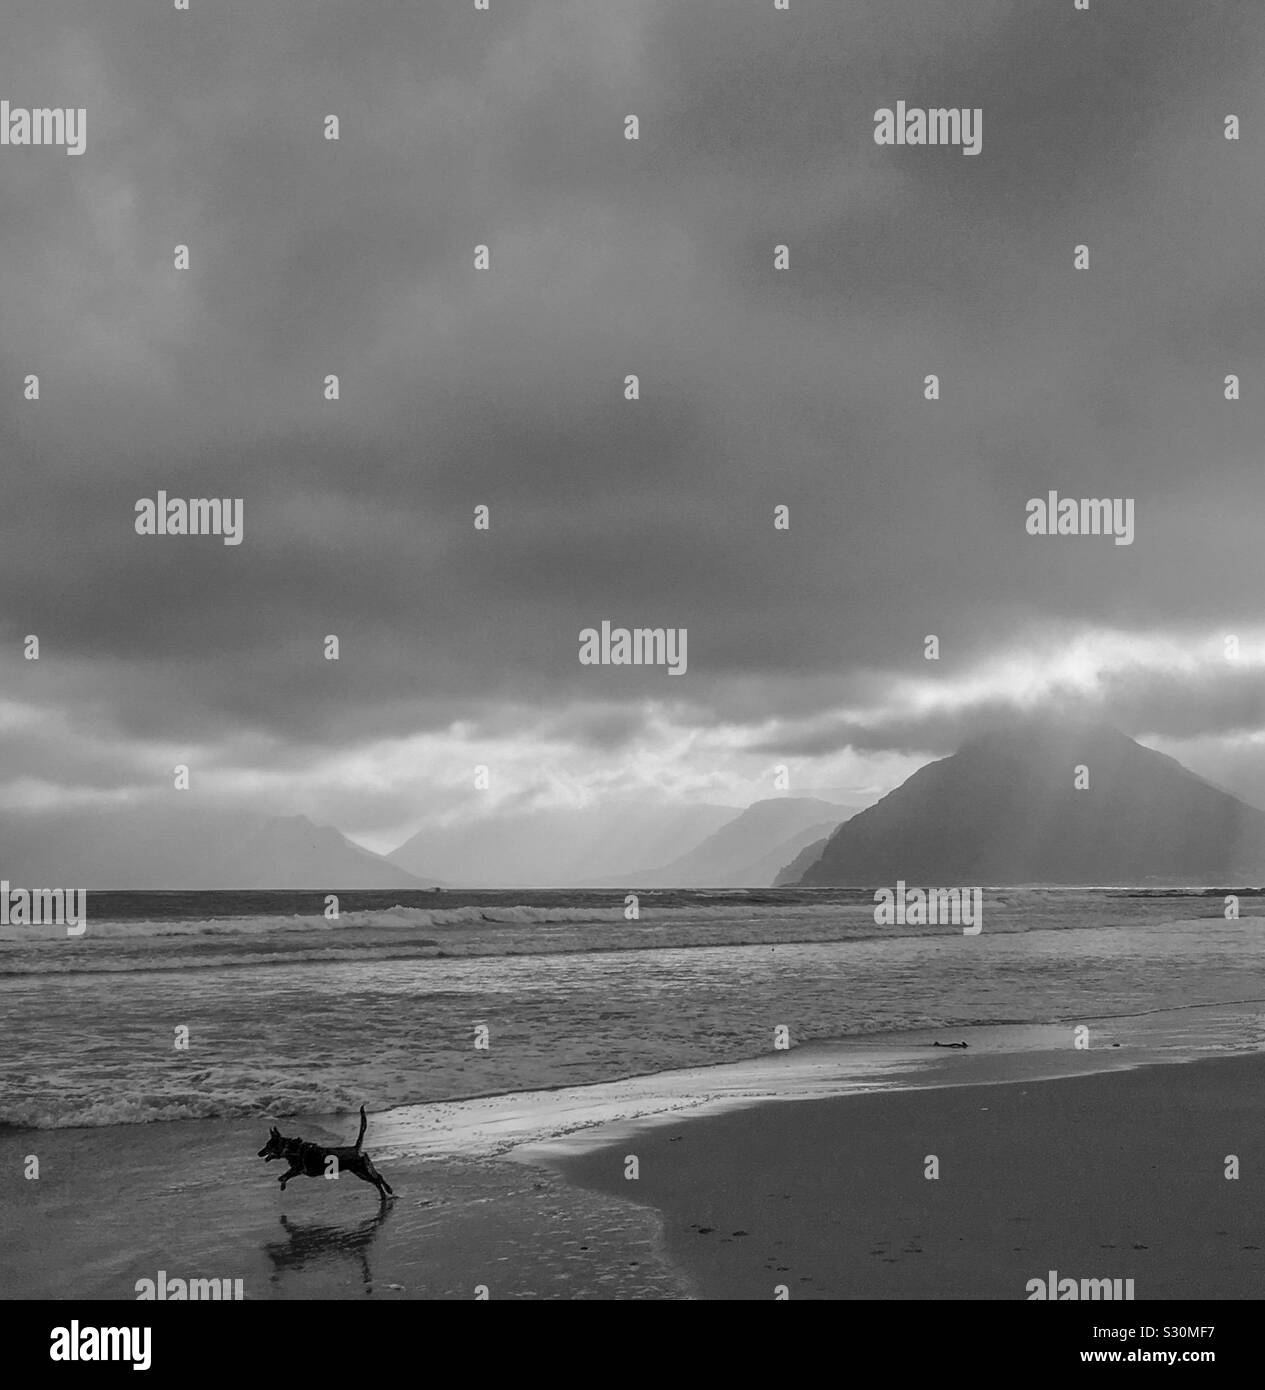 Leaping dog on Kommetjie Long Beach, Cape Peninsula, Cape Town, South Africa. Dramatic overcast cloudy sky. Black and white. 2019 Stock Photo